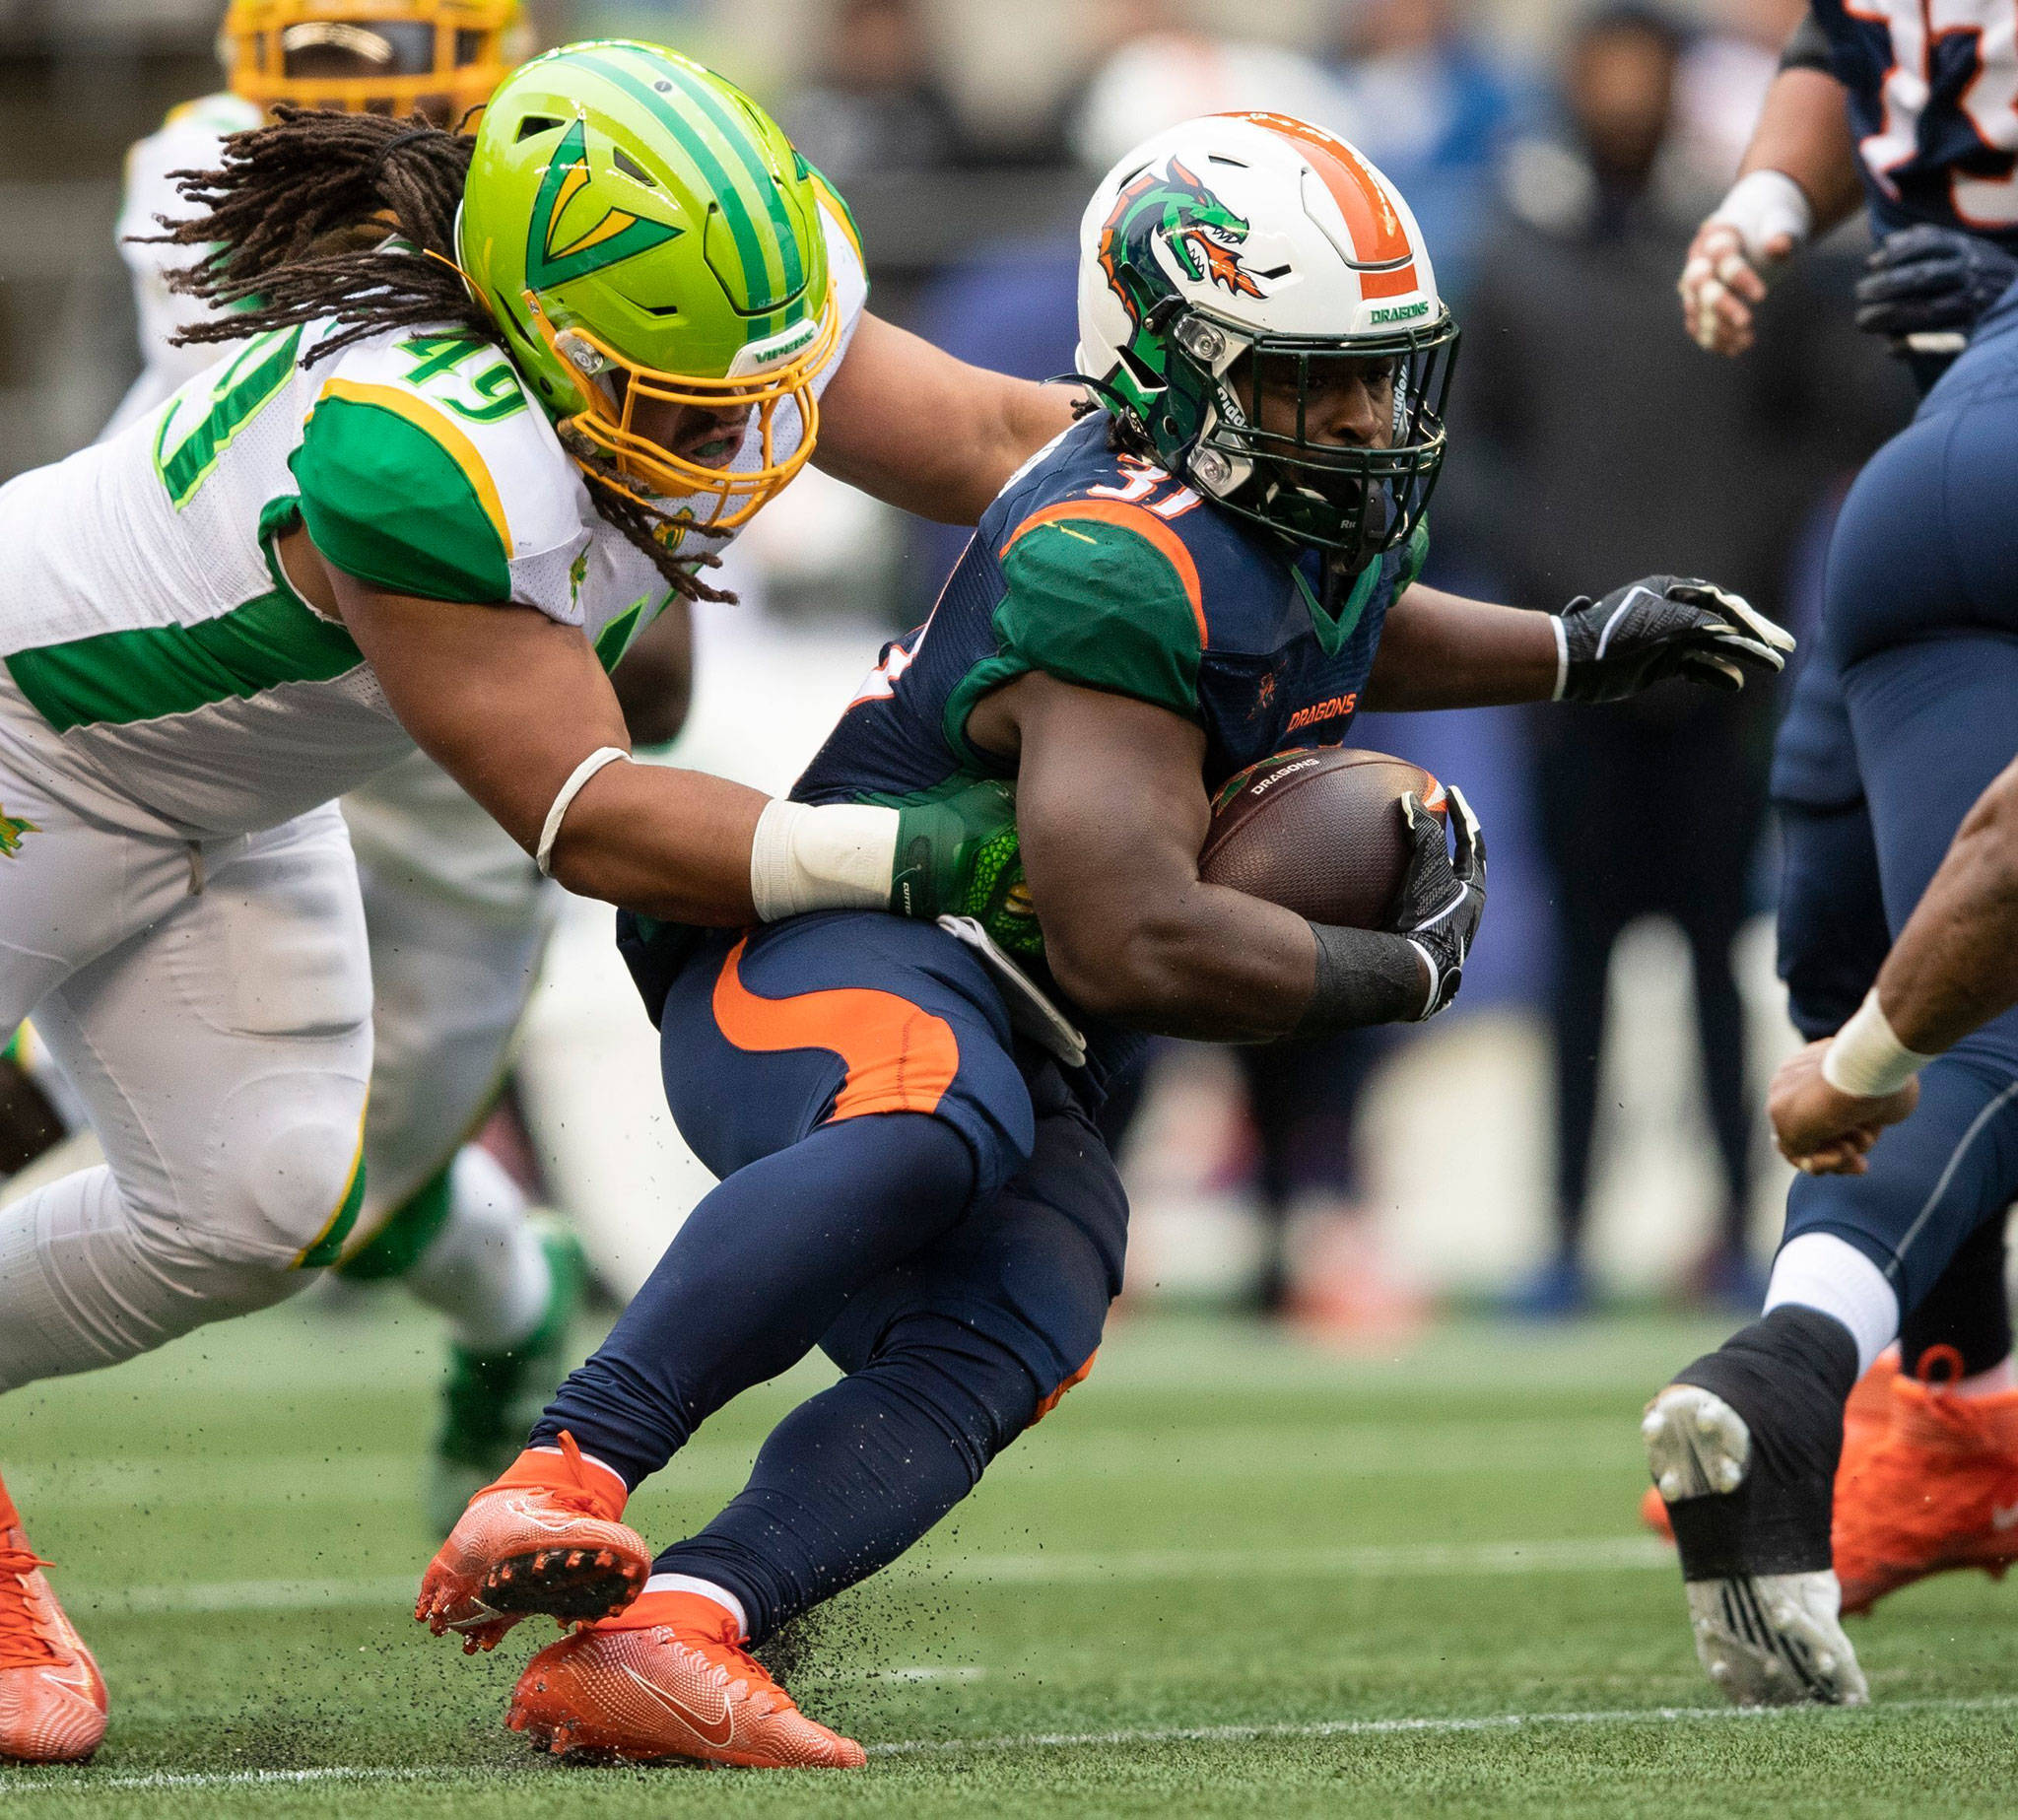 Dragons running back Ja’Quan Gardner carries the ball as theVipers’ Nikita Whitlock defends during an XFL game on Feb. 15, 2020, in Seattle. (Amanda Snyder/The Seattle Times via AP)